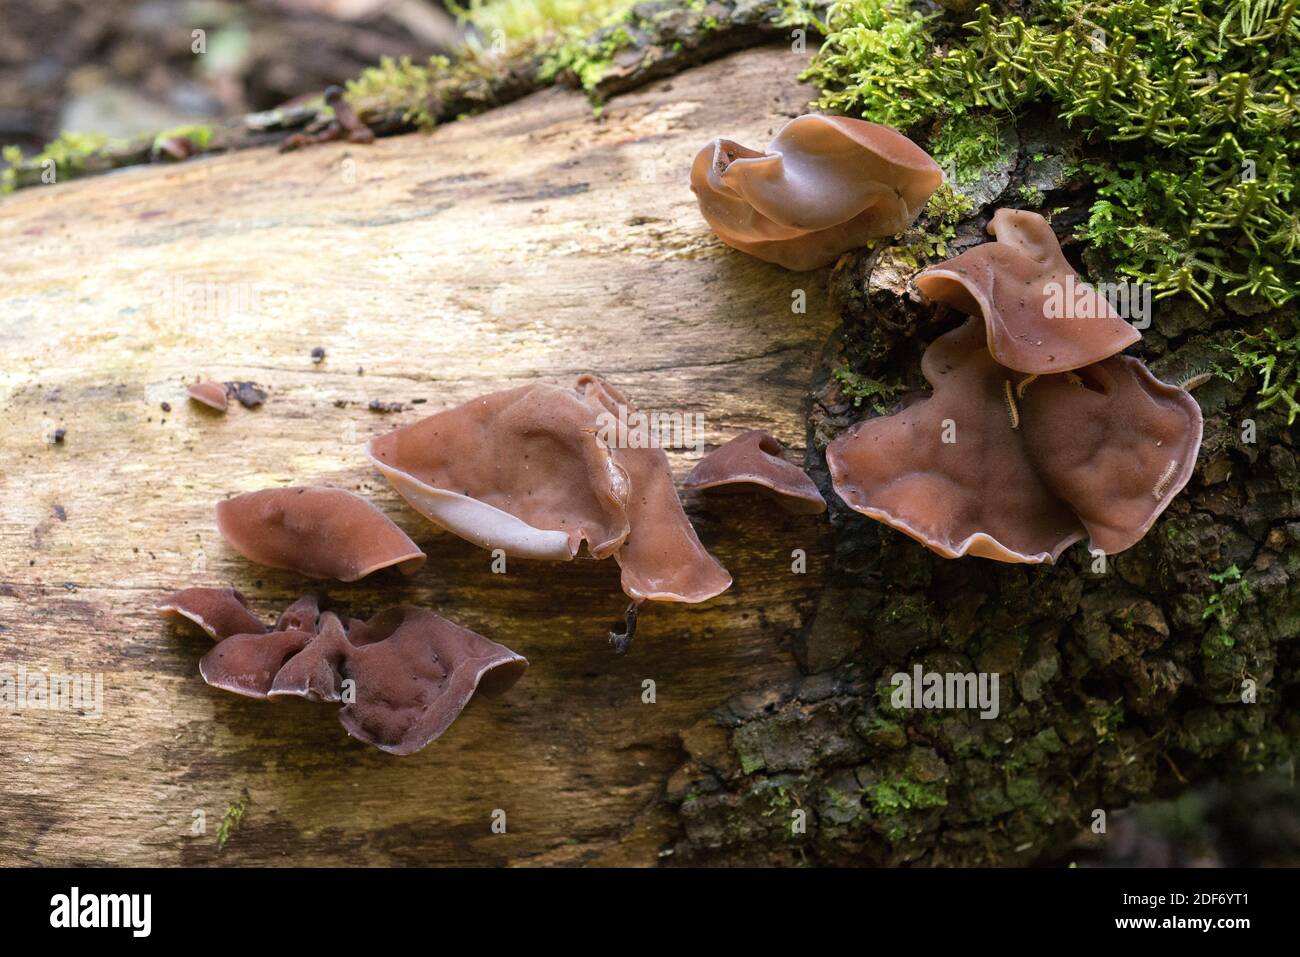 Jelly ear (Auricularia auricula-judae) is a parasitic or saprophyte fungus edible and medicinal. This photo was taken in La Palma Island, Canary Stock Photo